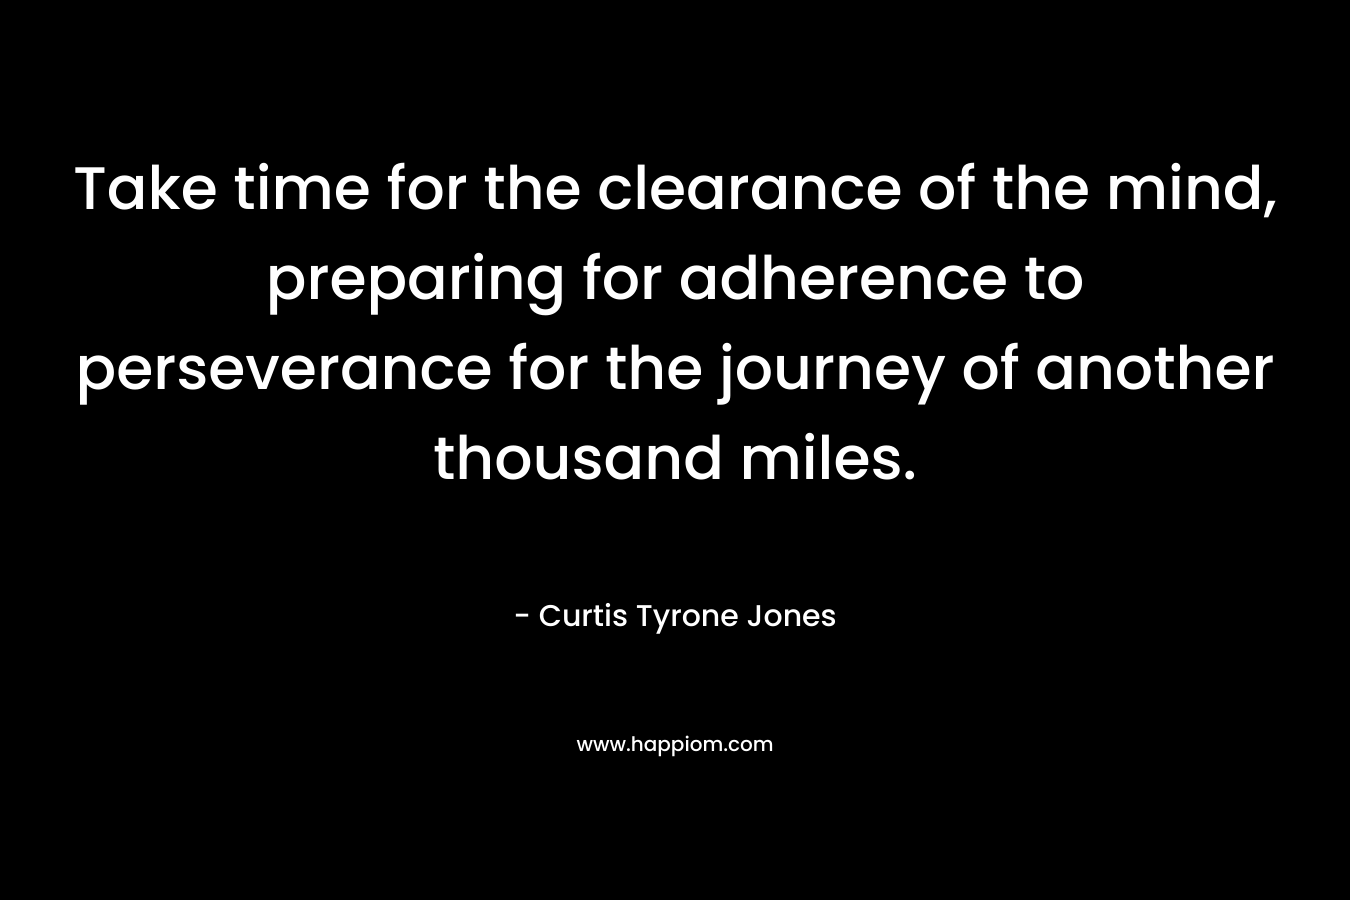 Take time for the clearance of the mind, preparing for adherence to perseverance for the journey of another thousand miles.